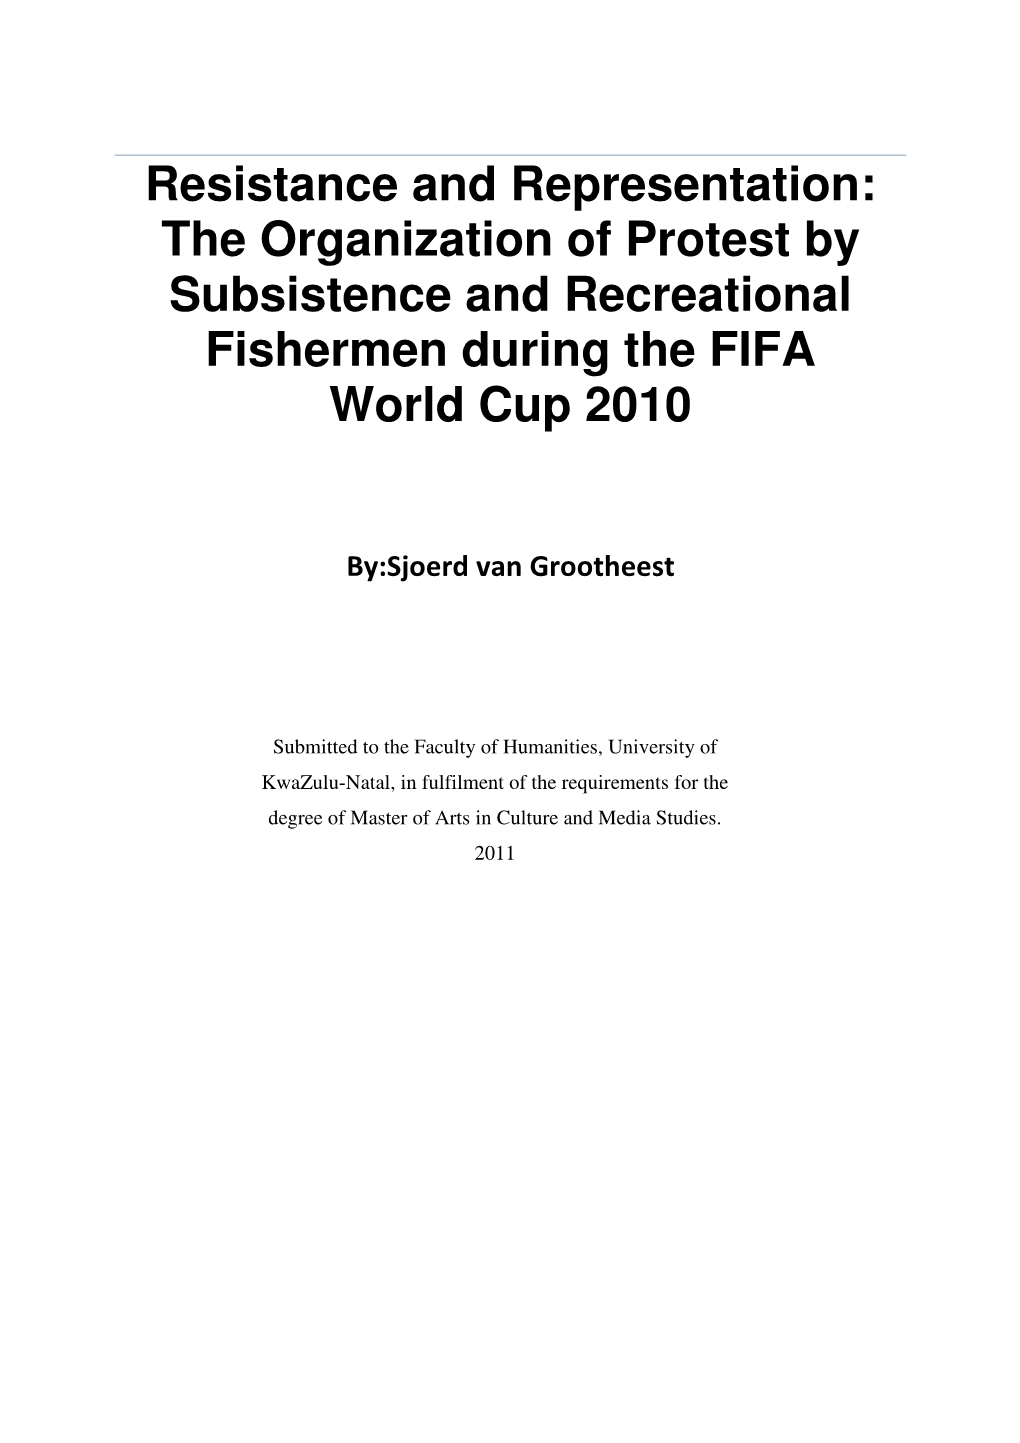 The Organization of Protest by Subsistence and Recreational Fishermen During the FIFA World Cup 2010